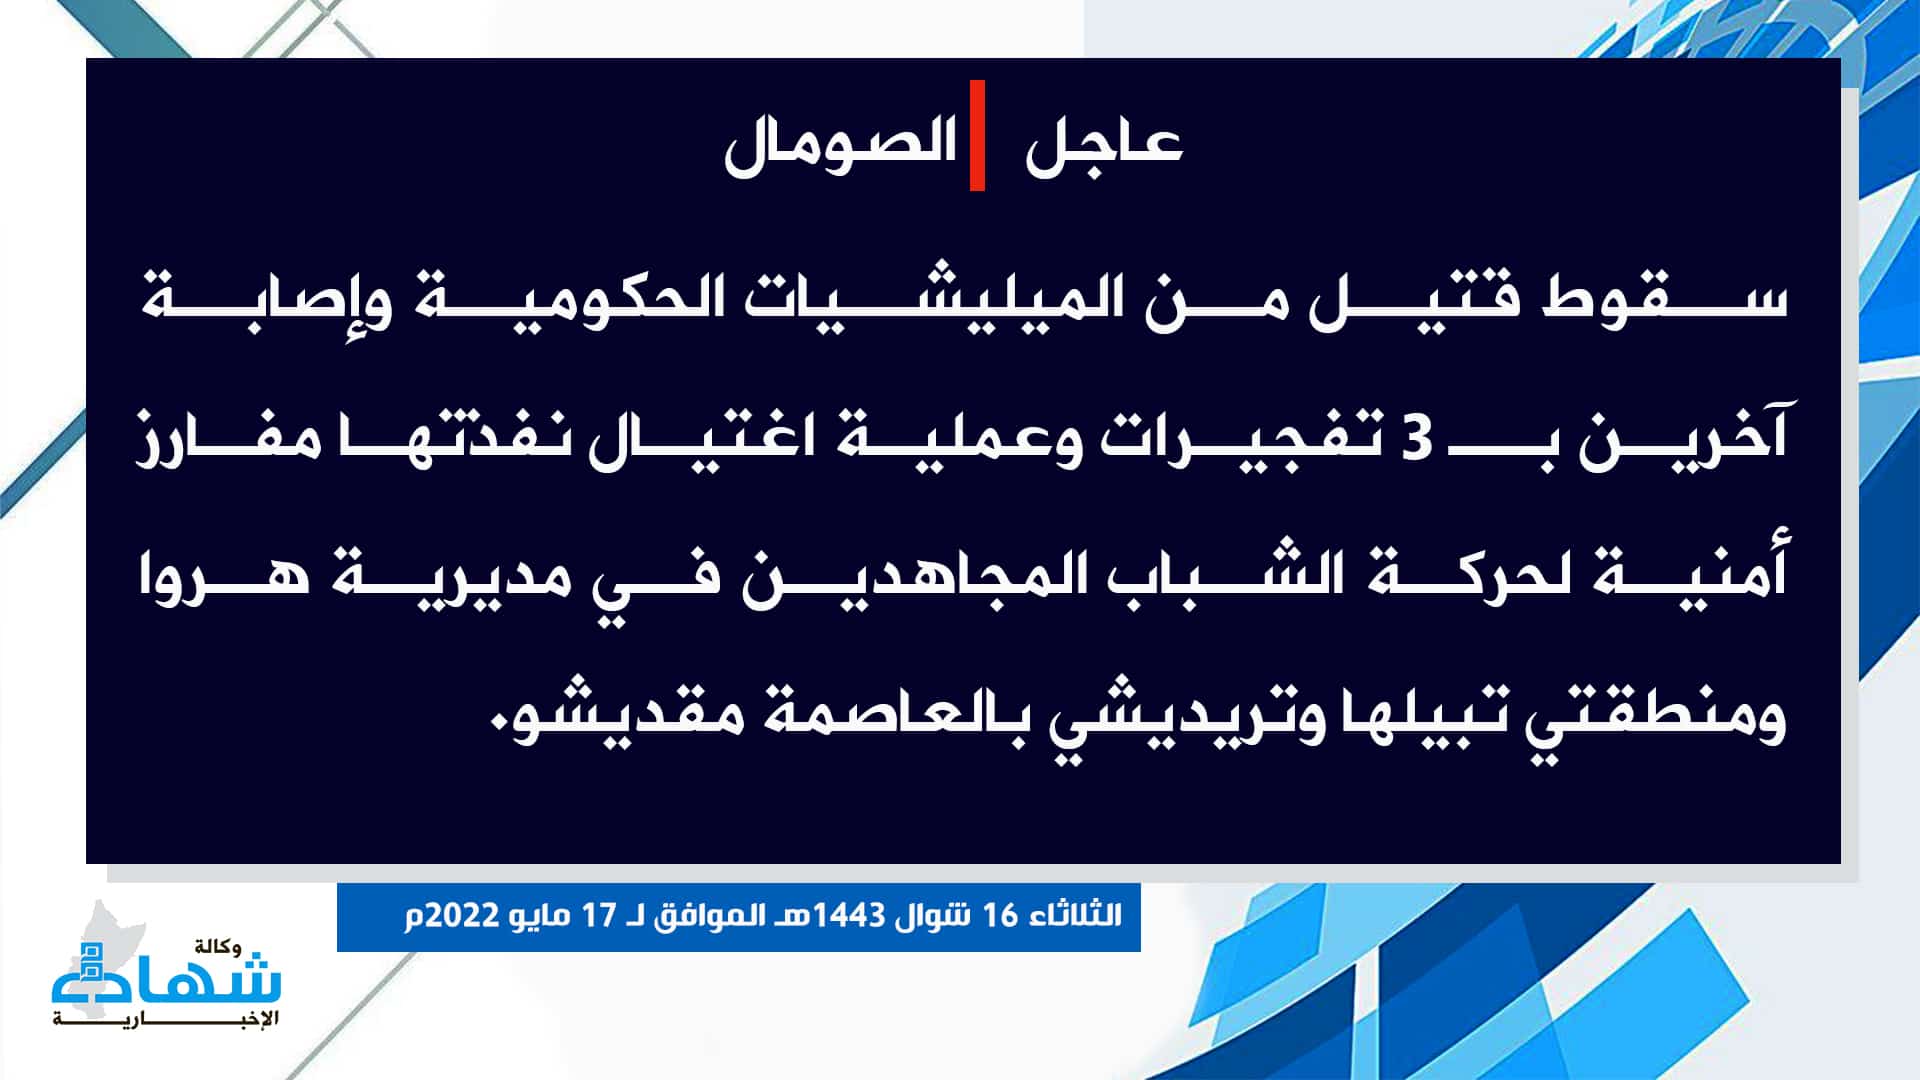 (Claim) al-Shabaab: A Somalian Forces Elements Was Killed and Others Wounded in Three IED Attacks and an Assassination Attack in Harwa, Tabilha and Tredishi in Mogadishu, Somalia - 17 May 2022